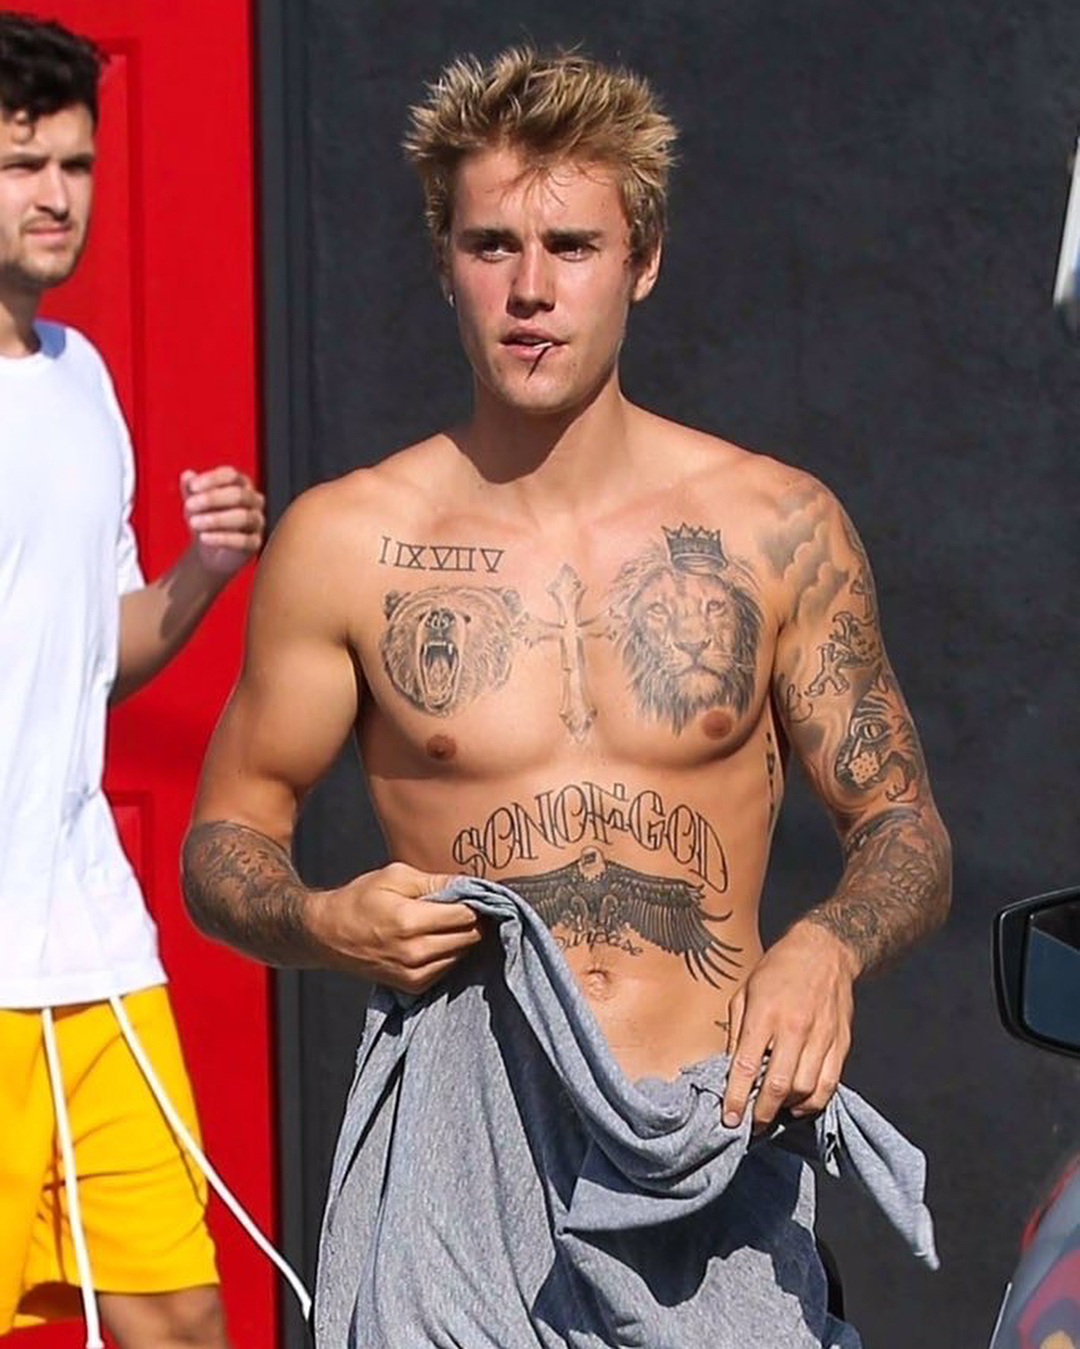 MALE CELEBRITIES: Justin Bieber shirtless with dad mega post